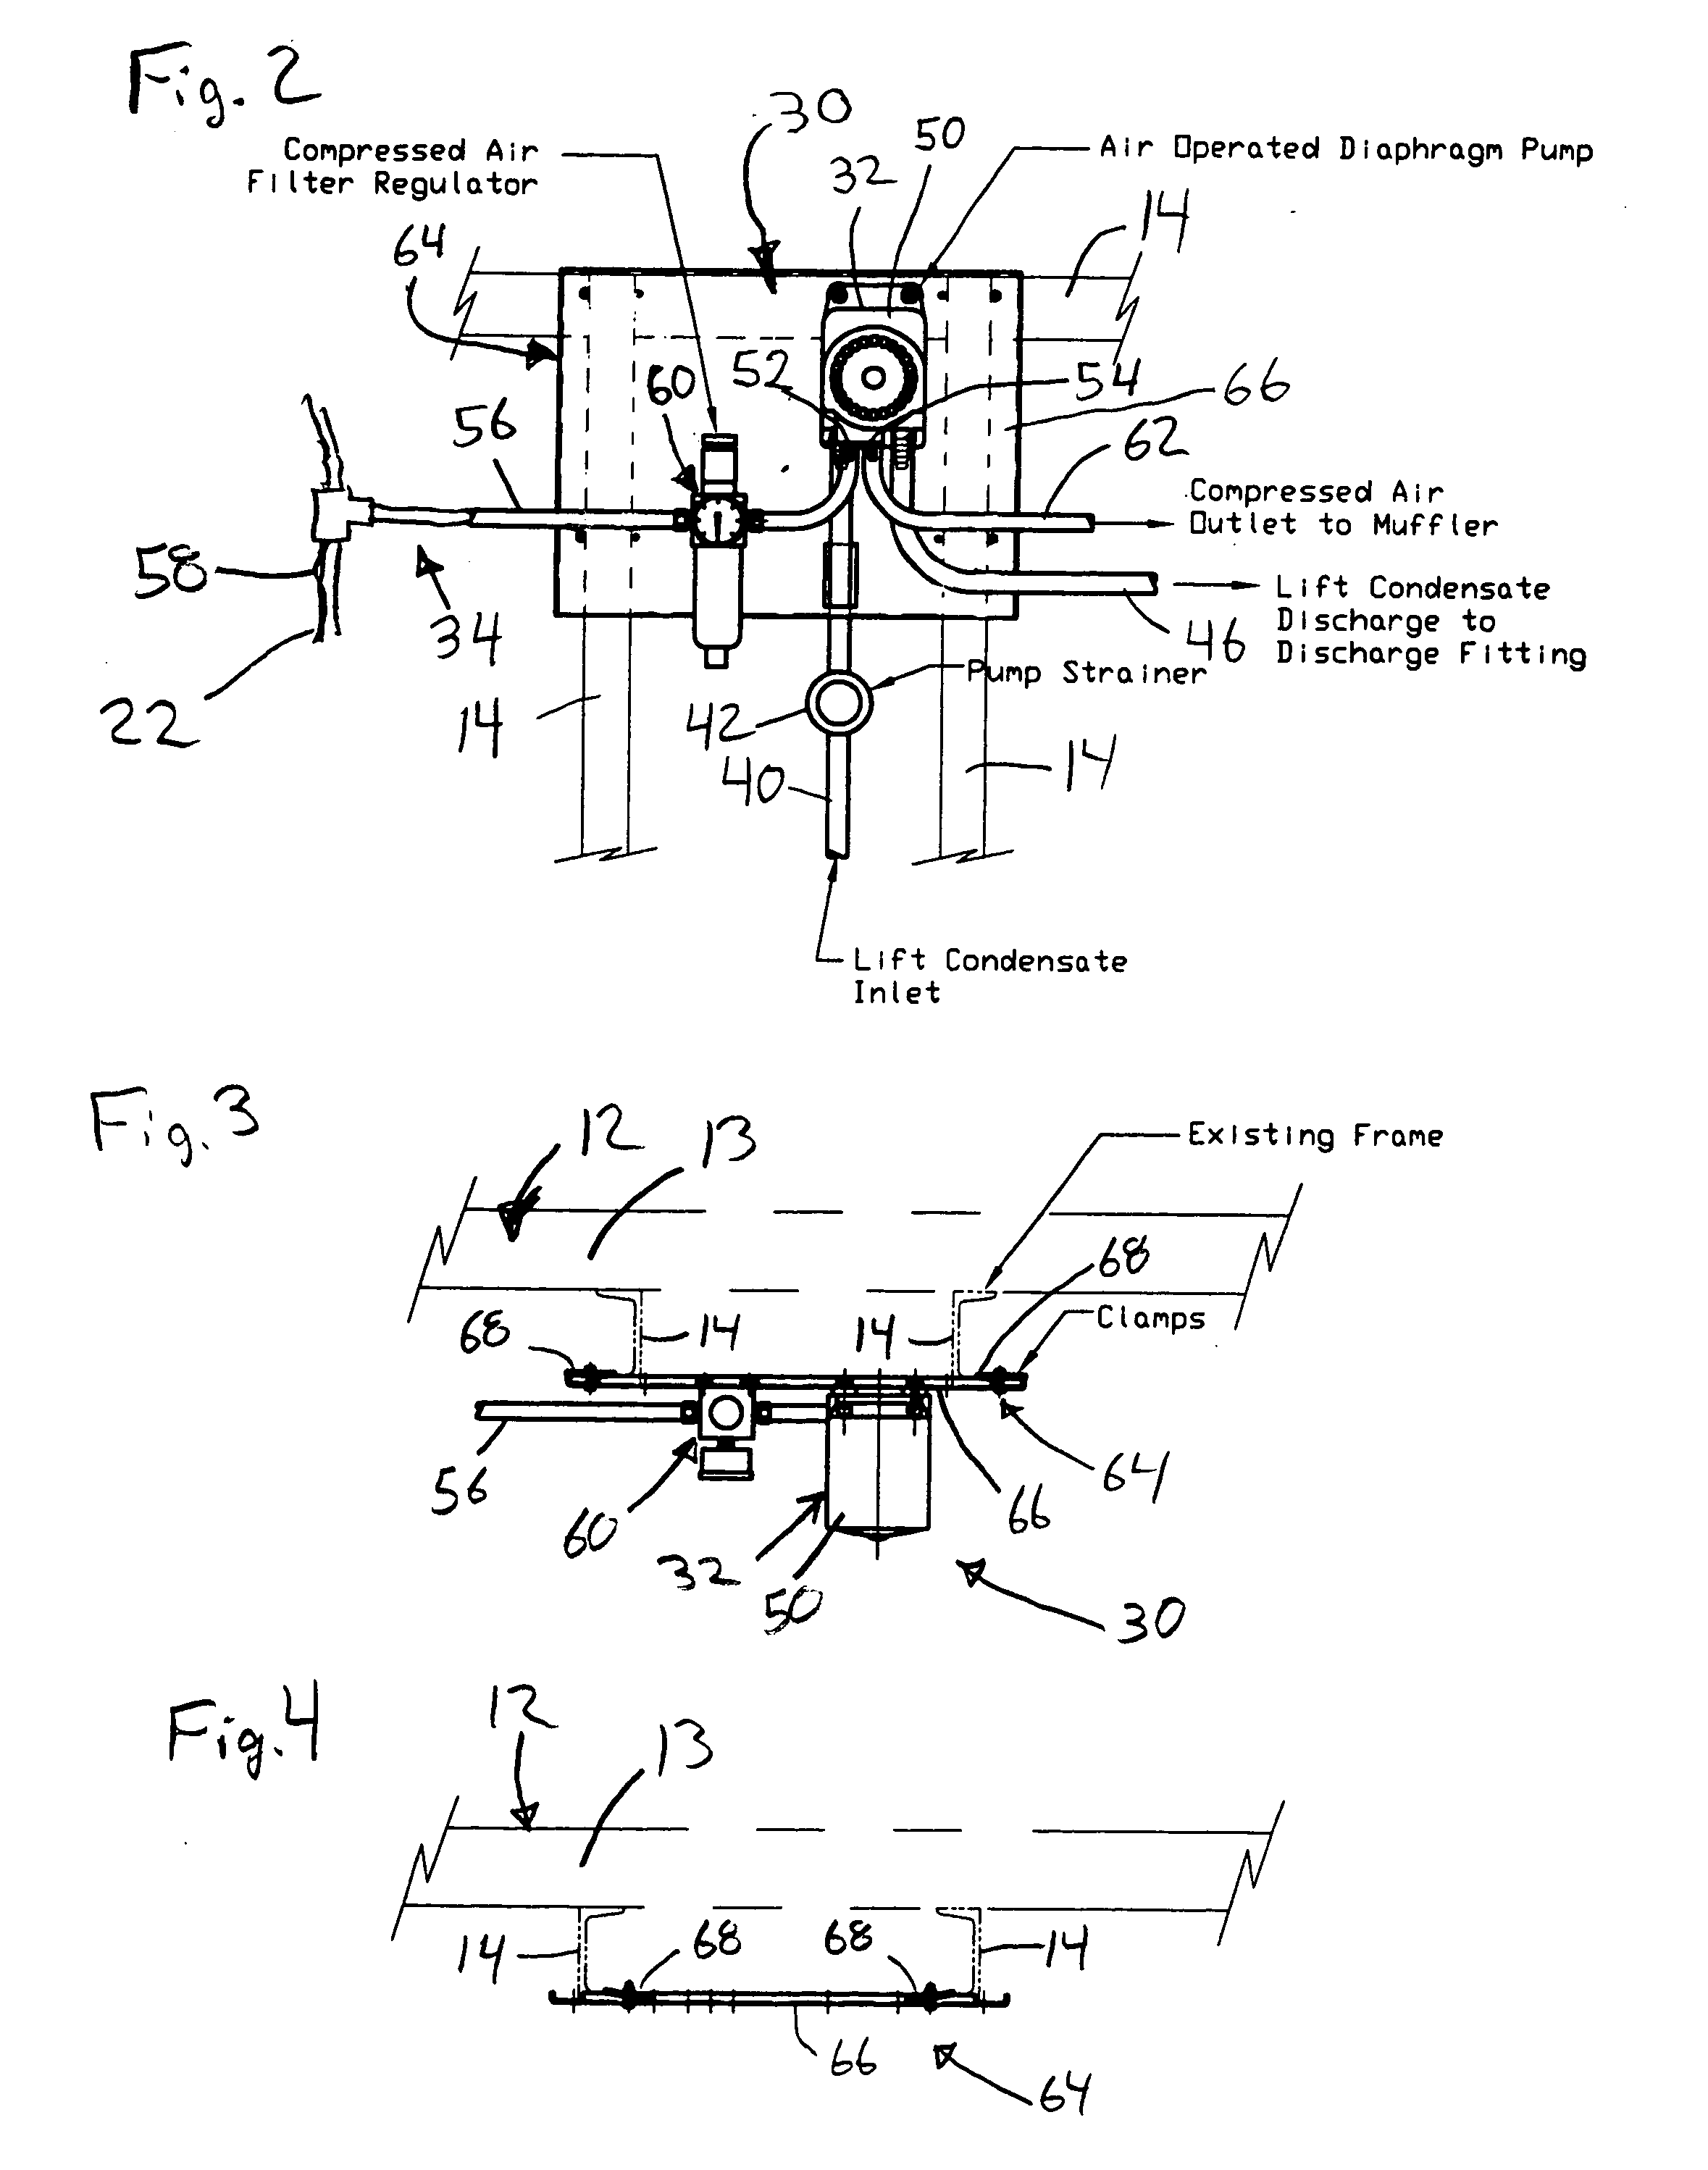 Condensate scavenging system and method for in-ground vehicle lifts